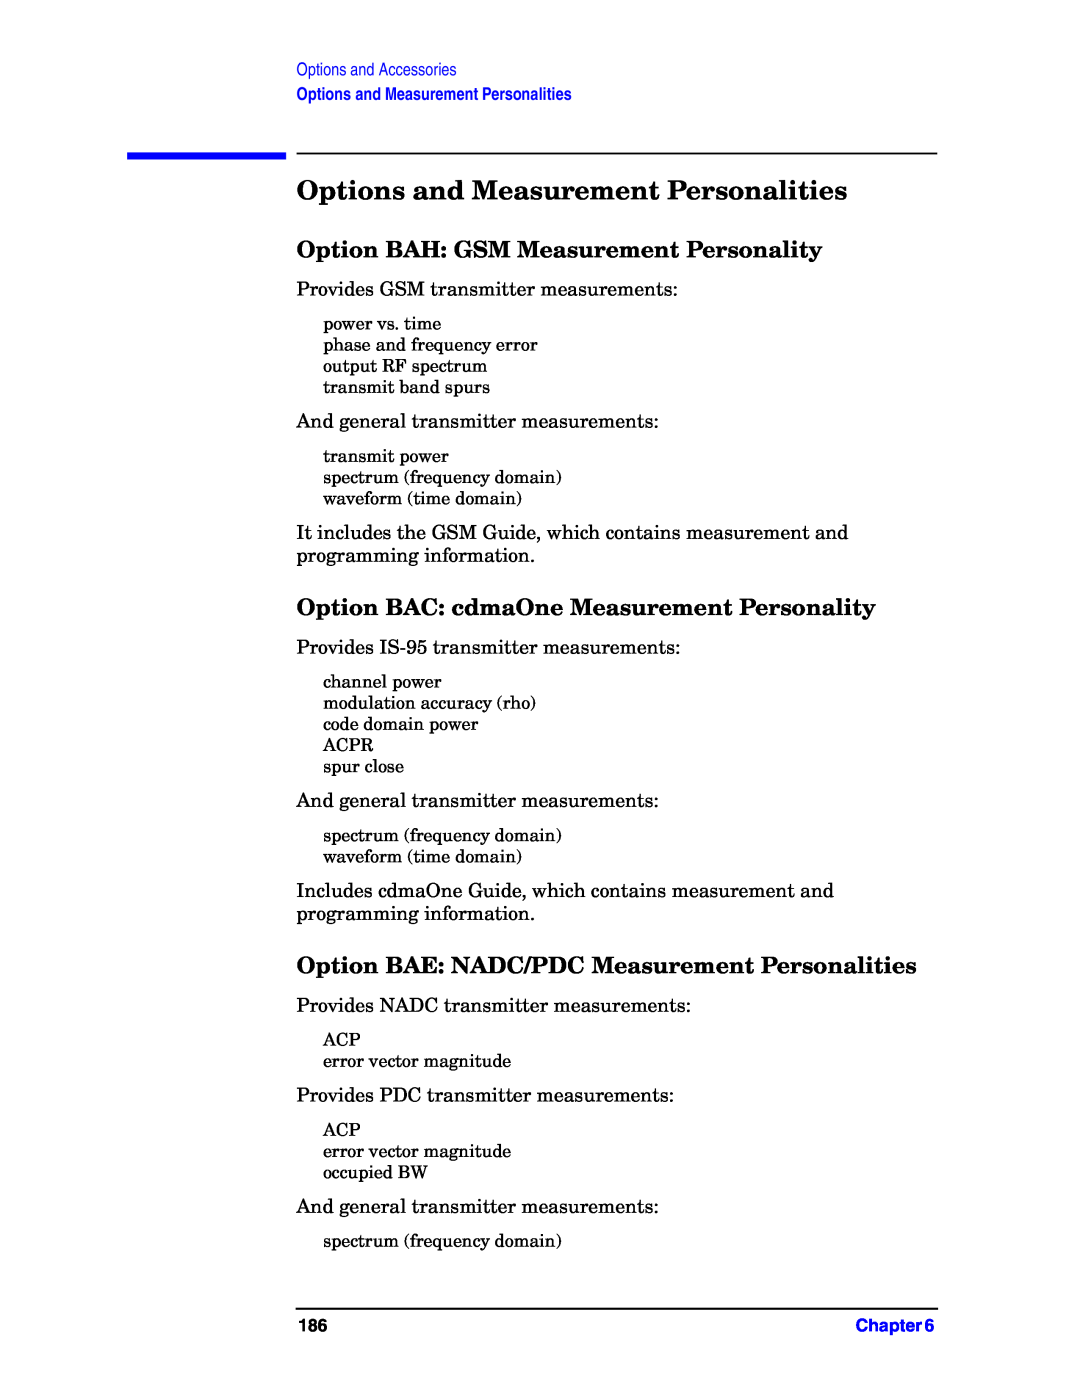 Agilent Technologies E4406A manual Options and Measurement Personalities, Option BAH: GSM Measurement Personality 